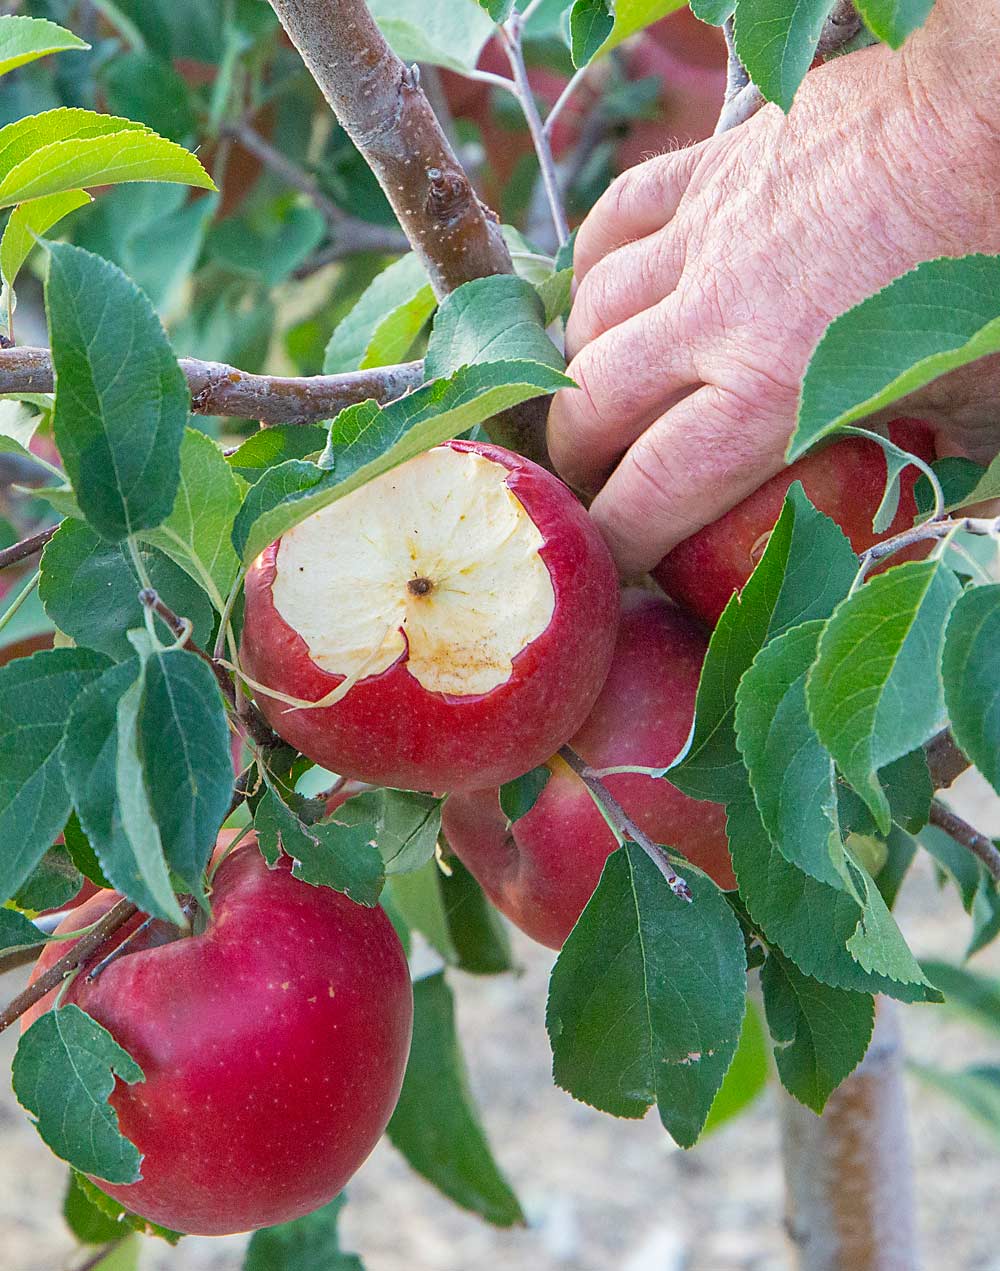 Deer get into apples of all sorts, but they especially like SugarBees, which have short, rigid stems that hold the fruit steady for the visiting vermin. (Ross Courtney/Good Fruit Grower)